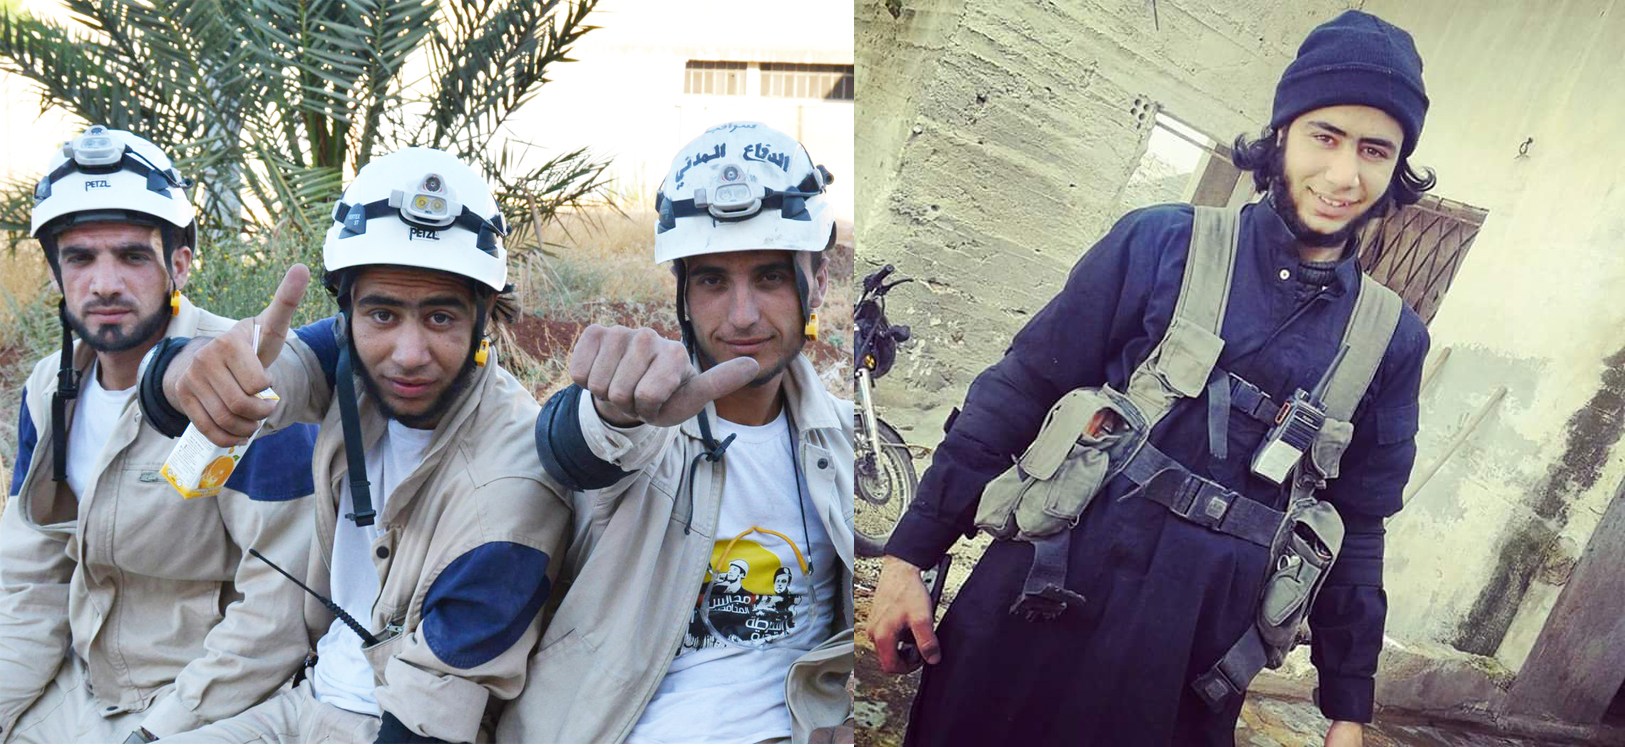 Mo’ad Baresh in his dual role as White Helmets operative and Nusra Front-associated extremist. (Photo: Clarity of Signal/21st Century Wire)